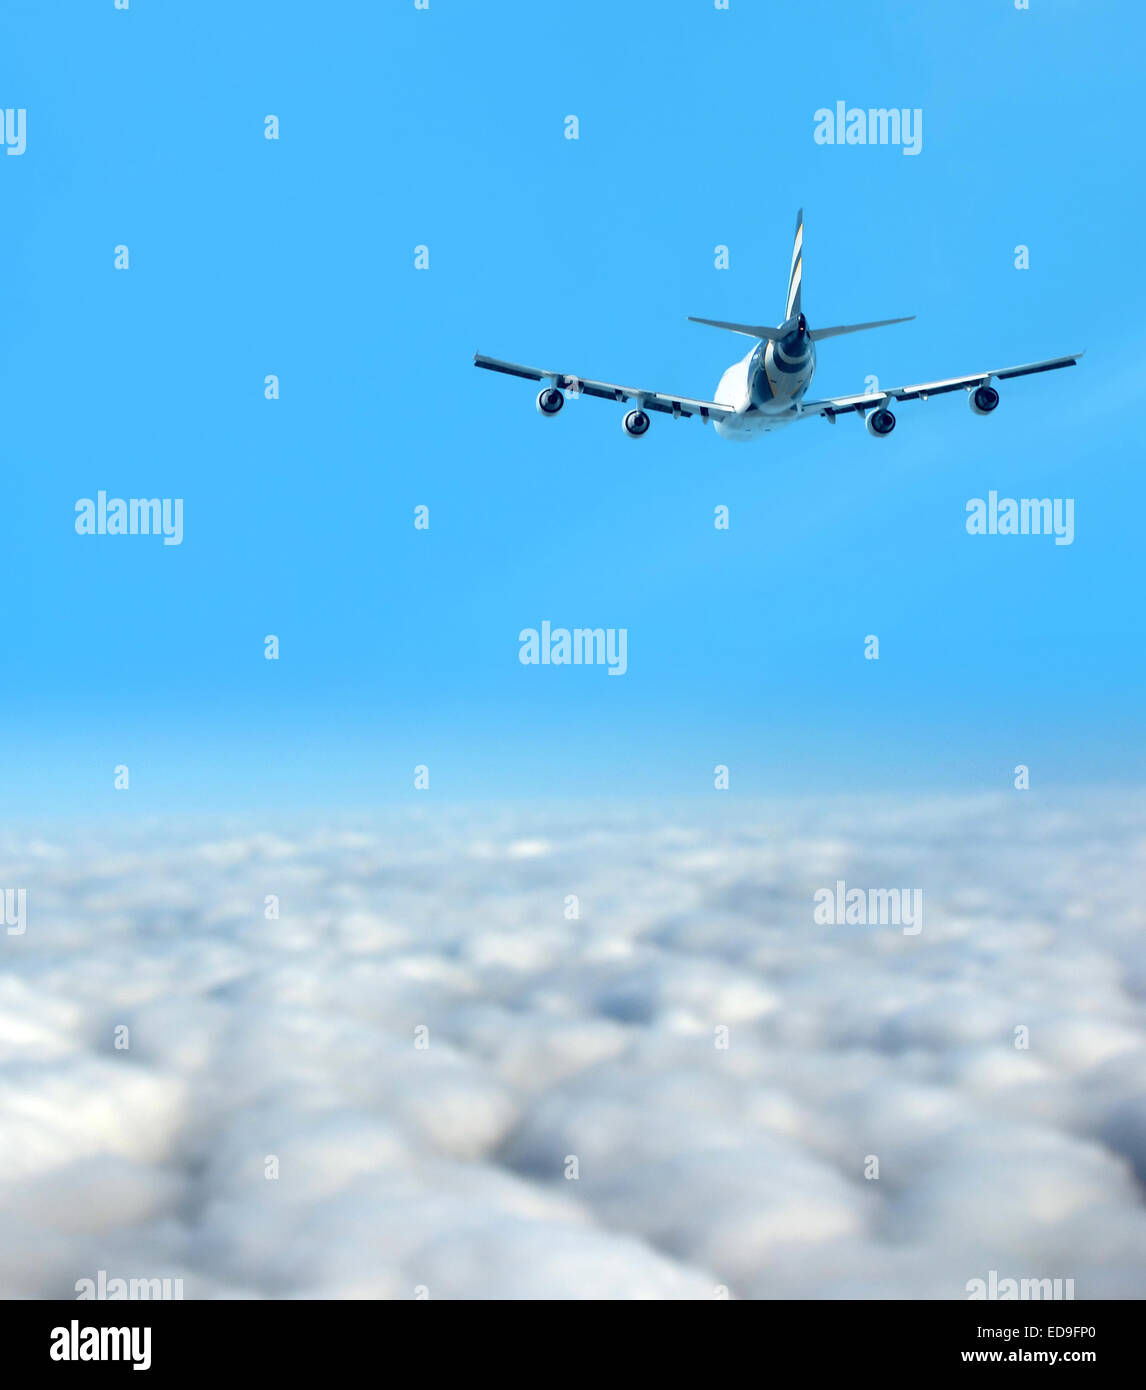 Heavy Boeing 747 jumbo jet airplane flying above the clouds Stock Photo